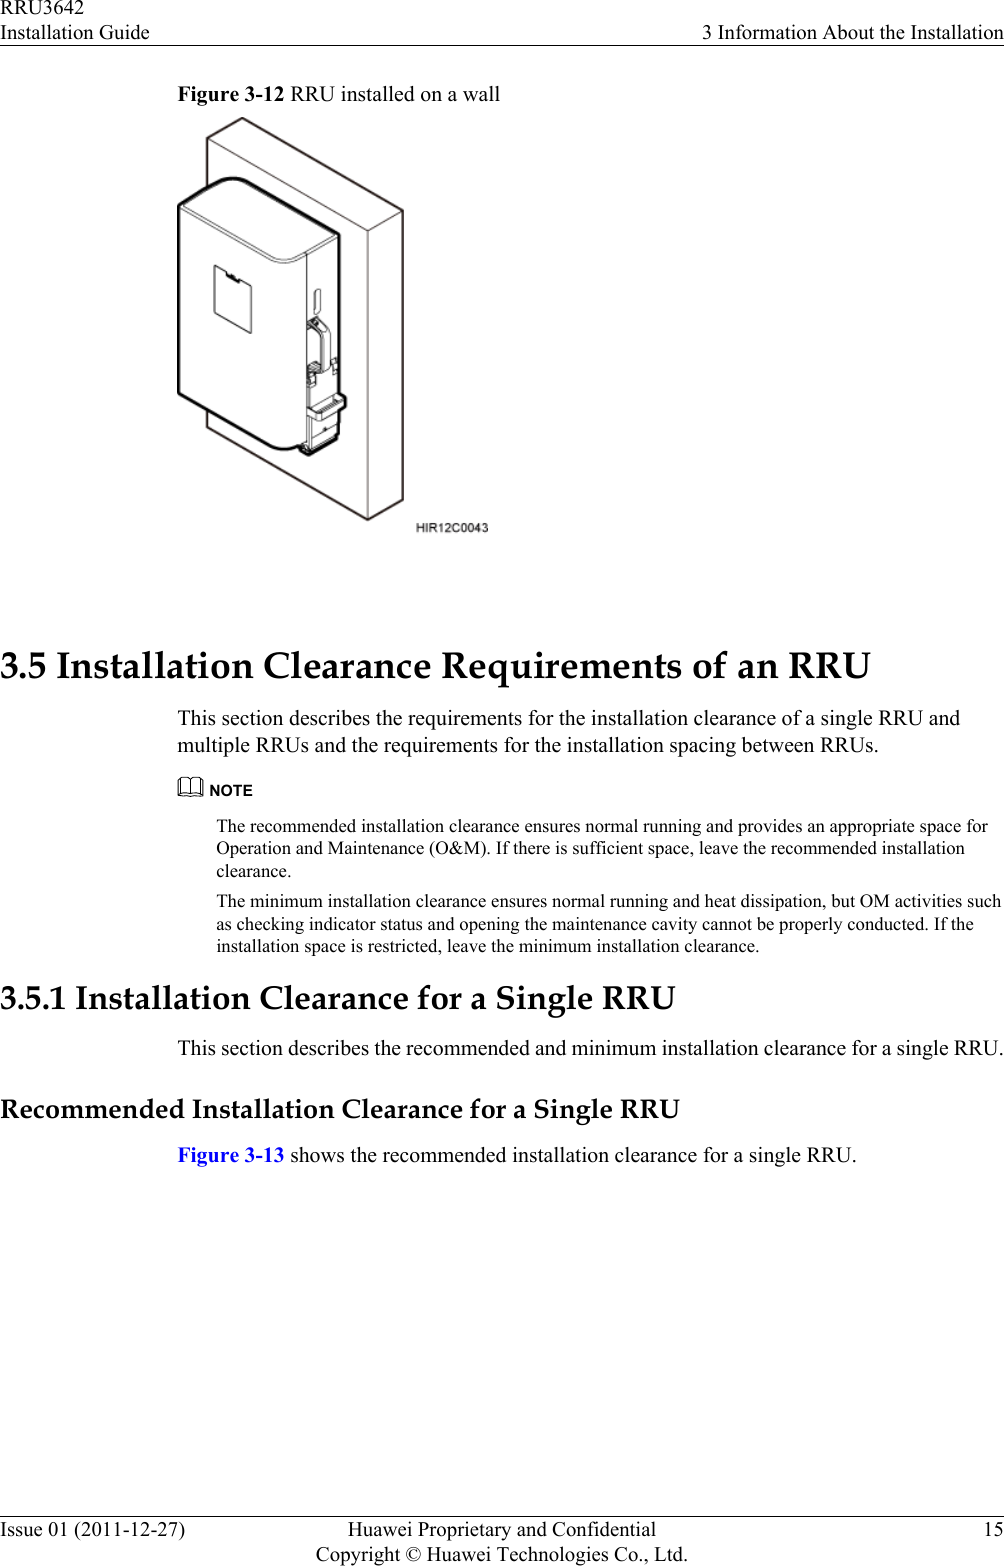 Figure 3-12 RRU installed on a wall 3.5 Installation Clearance Requirements of an RRUThis section describes the requirements for the installation clearance of a single RRU andmultiple RRUs and the requirements for the installation spacing between RRUs.NOTEThe recommended installation clearance ensures normal running and provides an appropriate space forOperation and Maintenance (O&amp;M). If there is sufficient space, leave the recommended installationclearance.The minimum installation clearance ensures normal running and heat dissipation, but OM activities suchas checking indicator status and opening the maintenance cavity cannot be properly conducted. If theinstallation space is restricted, leave the minimum installation clearance.3.5.1 Installation Clearance for a Single RRUThis section describes the recommended and minimum installation clearance for a single RRU.Recommended Installation Clearance for a Single RRUFigure 3-13 shows the recommended installation clearance for a single RRU.RRU3642Installation Guide 3 Information About the InstallationIssue 01 (2011-12-27) Huawei Proprietary and ConfidentialCopyright © Huawei Technologies Co., Ltd.15